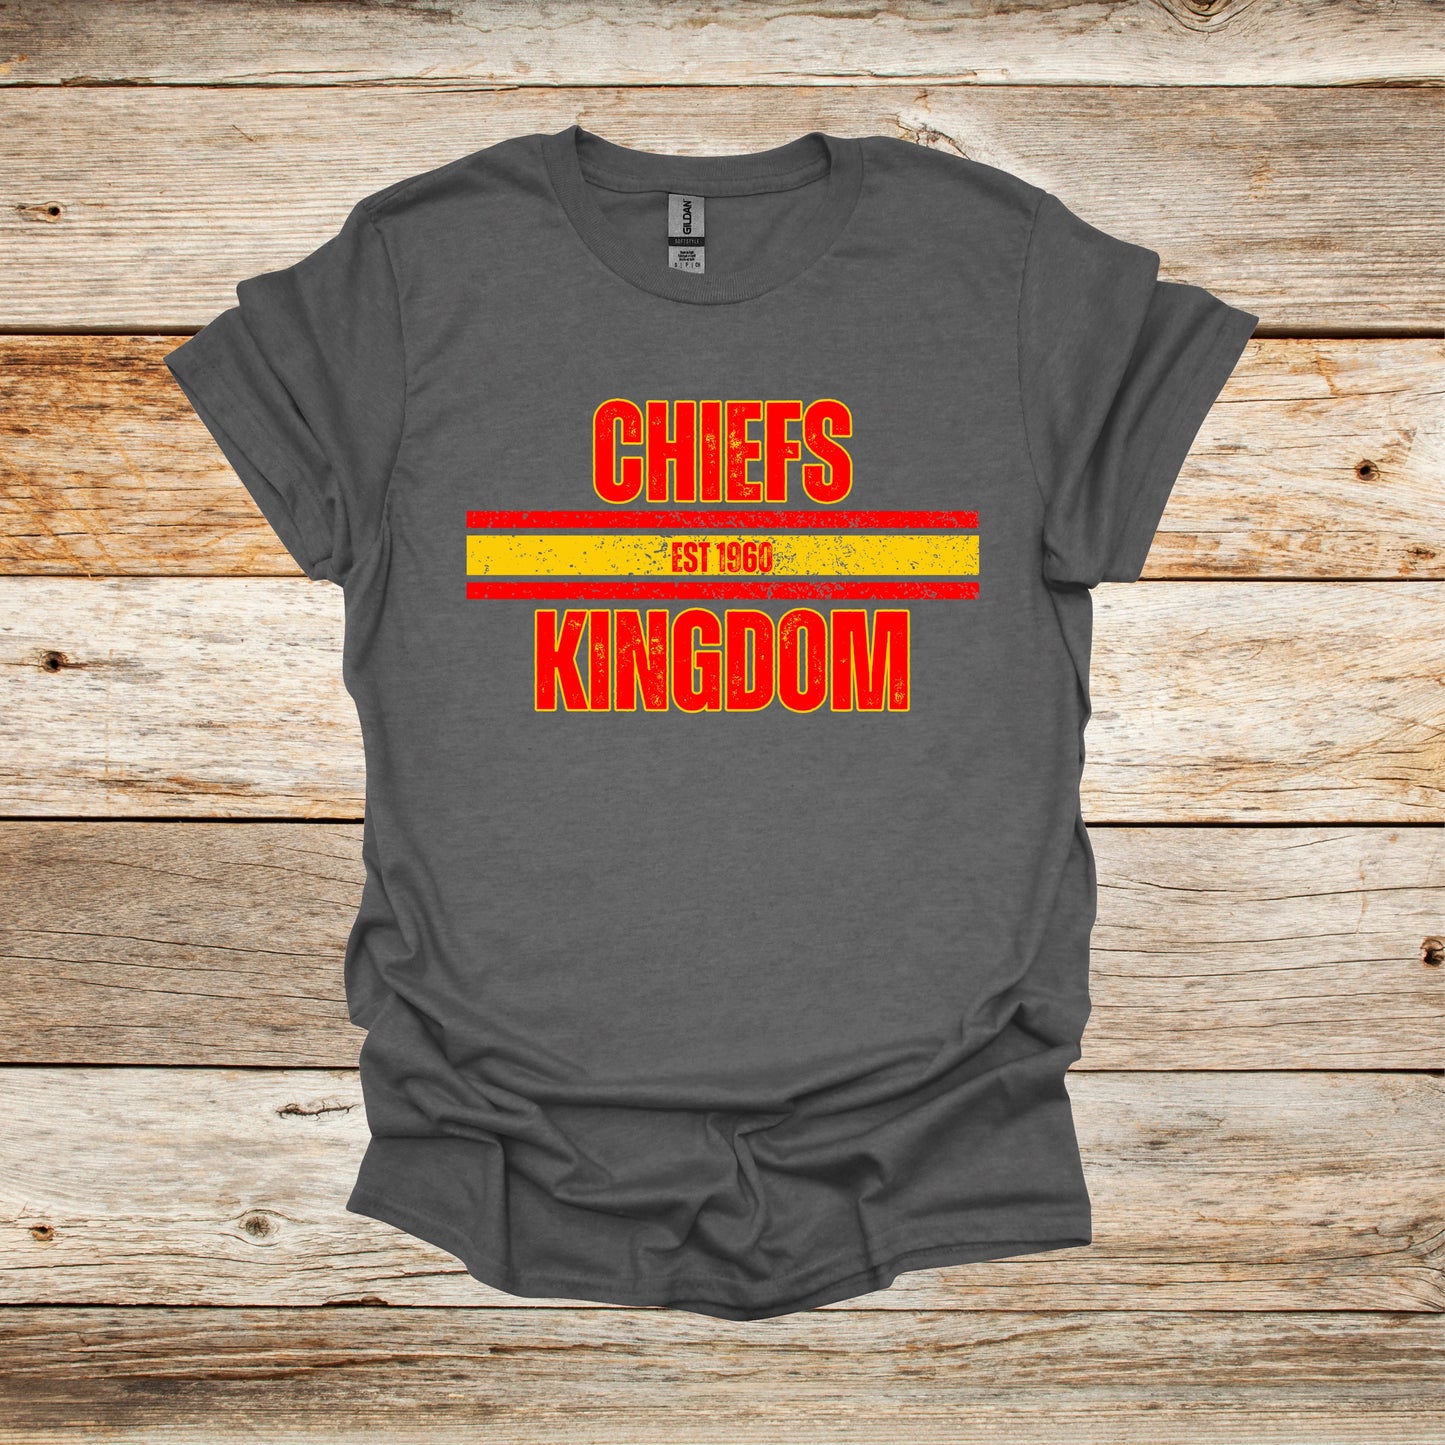 Football T-Shirt - Chiefs Football -Chiefs Kingdom - Adult and Children's Tee Shirts - Sports T-Shirts Graphic Avenue Graphite Heather Adult Small 